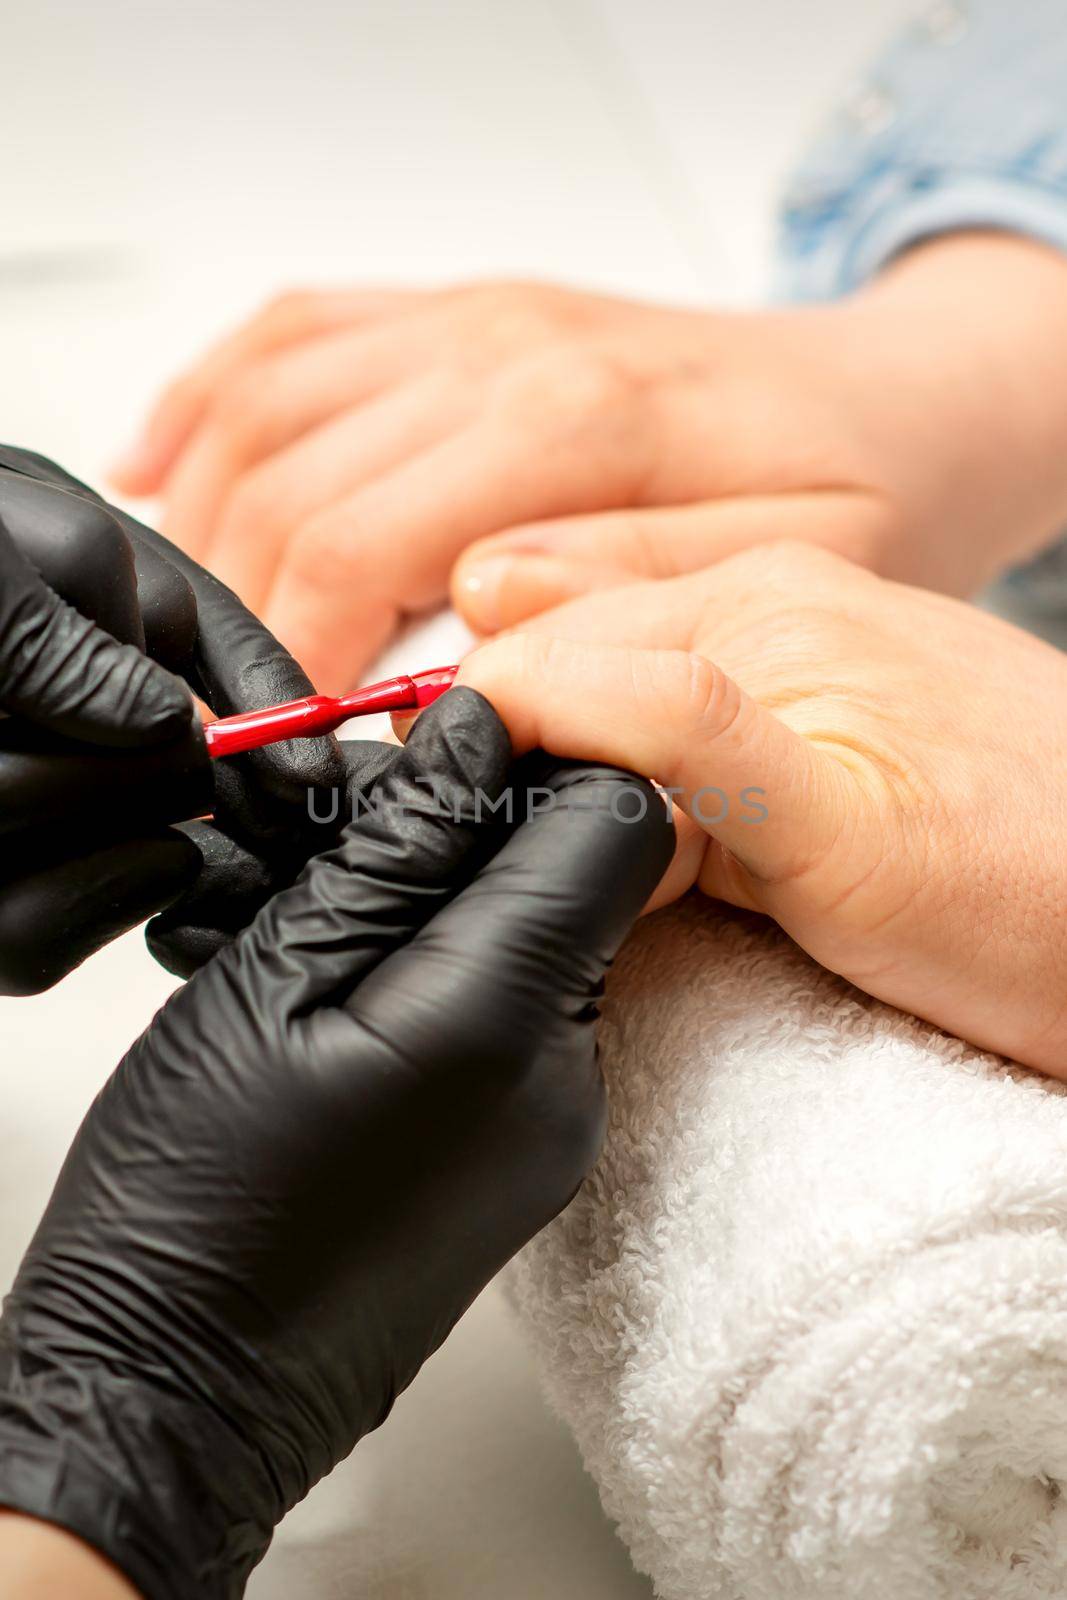 Manicure varnish painting. Close-up of a manicure master wearing rubber black gloves applying red varnish on a female fingernail in the beauty salon